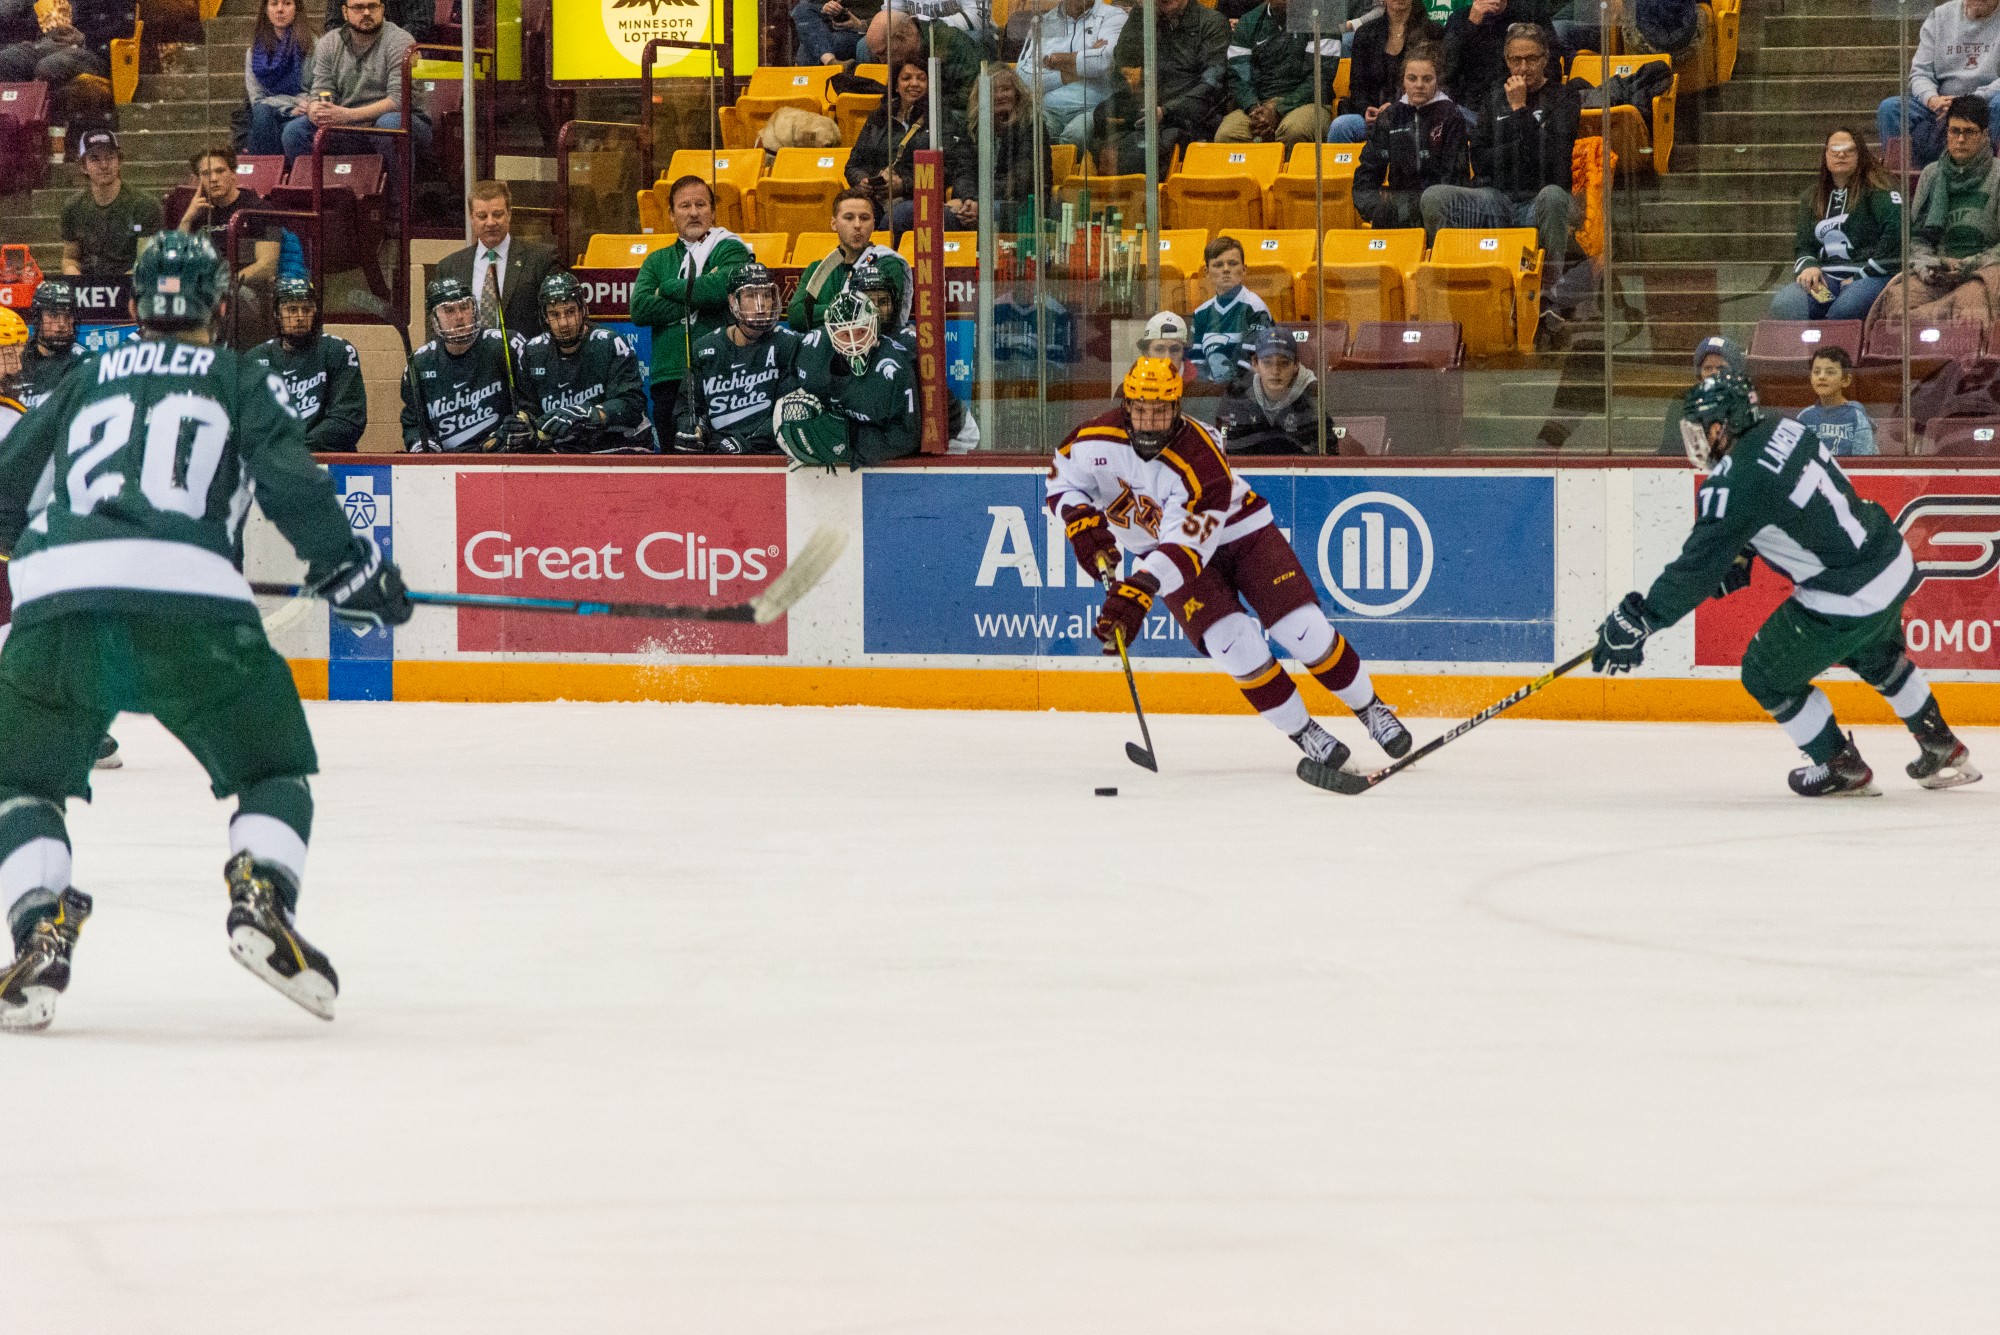 Gophers Defenseman Matt Staudacher dodges a defender at the 3M Arena at Marriucci on Friday, Feb. 7. Gophers won against Michigan State 4-1.